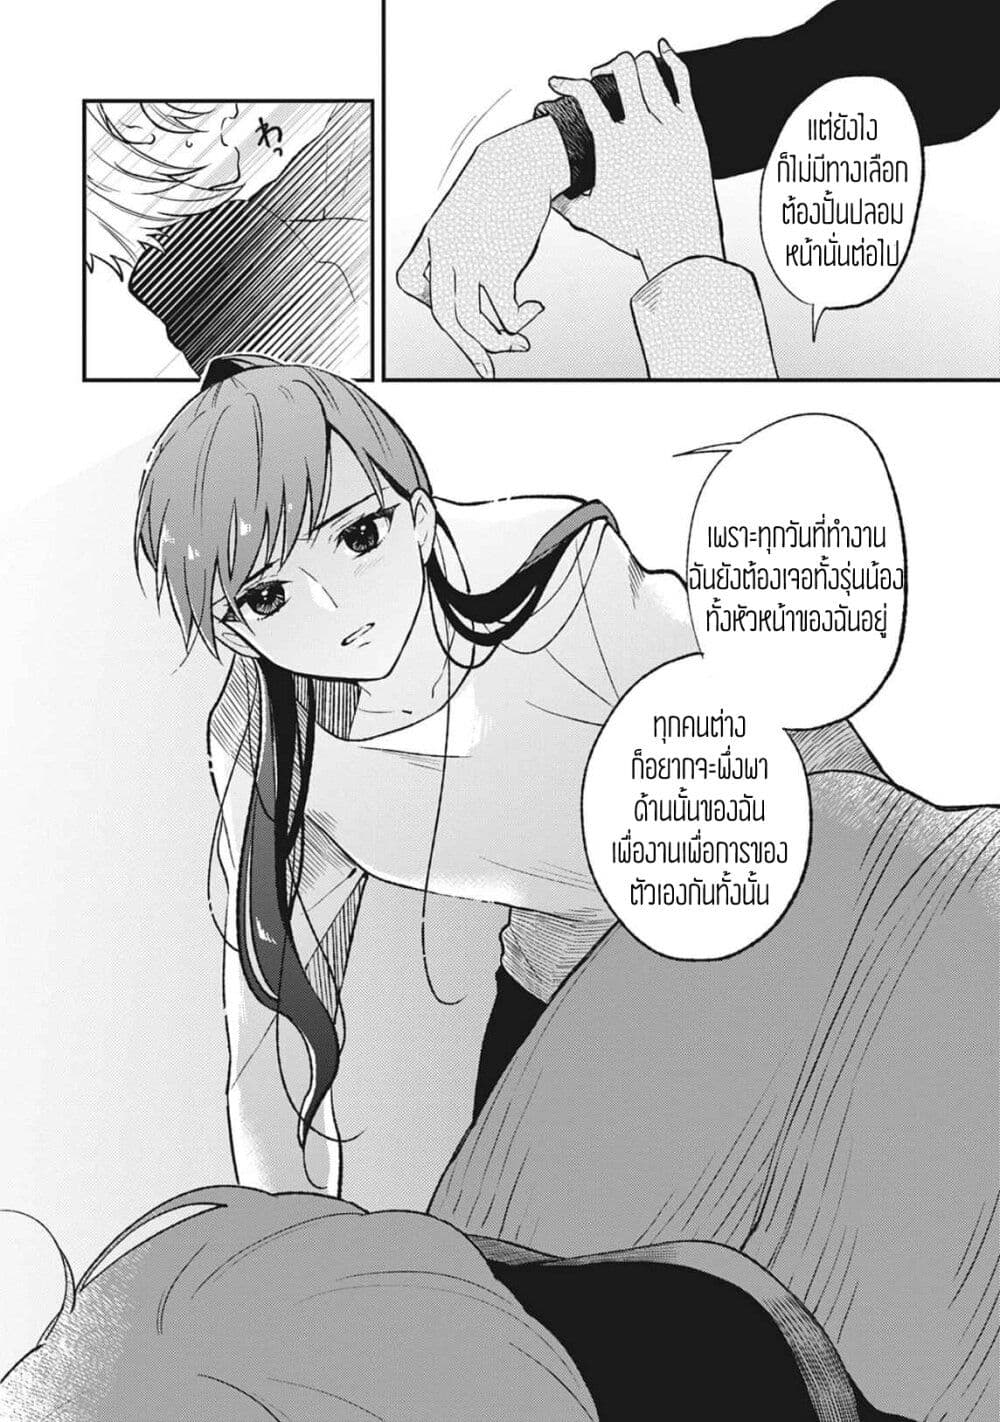 The Back Alley Romance Story ตอนที่ 3 (18)